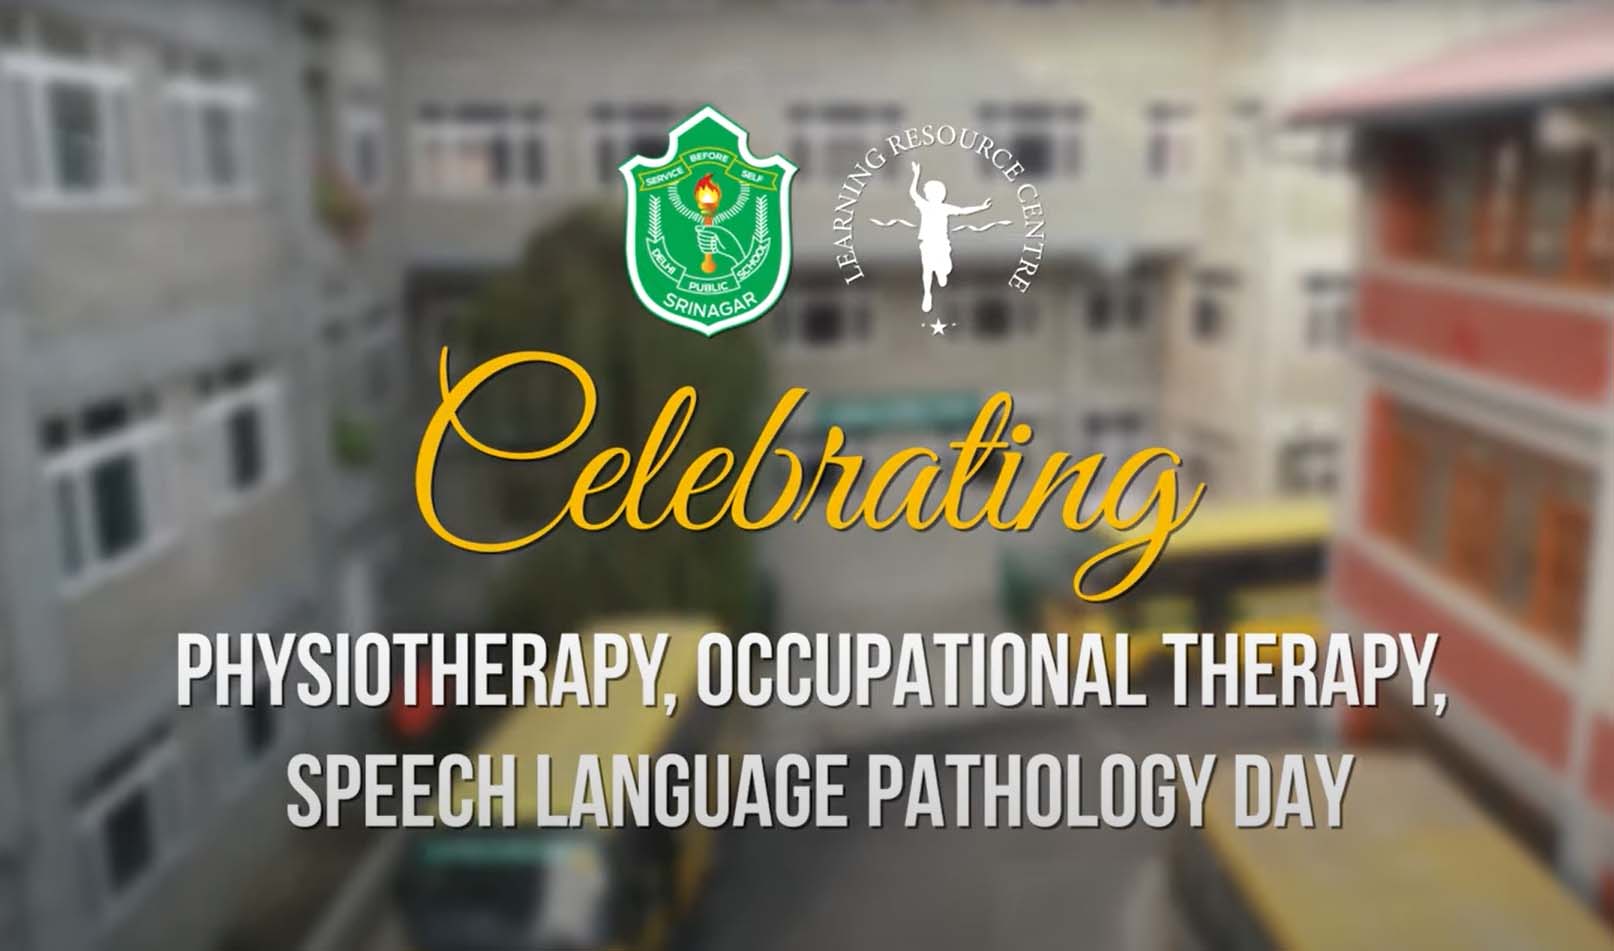 Physiotherapy, Occupational Therapy, Speech Therapy and Pathology Day celebrated at LRC